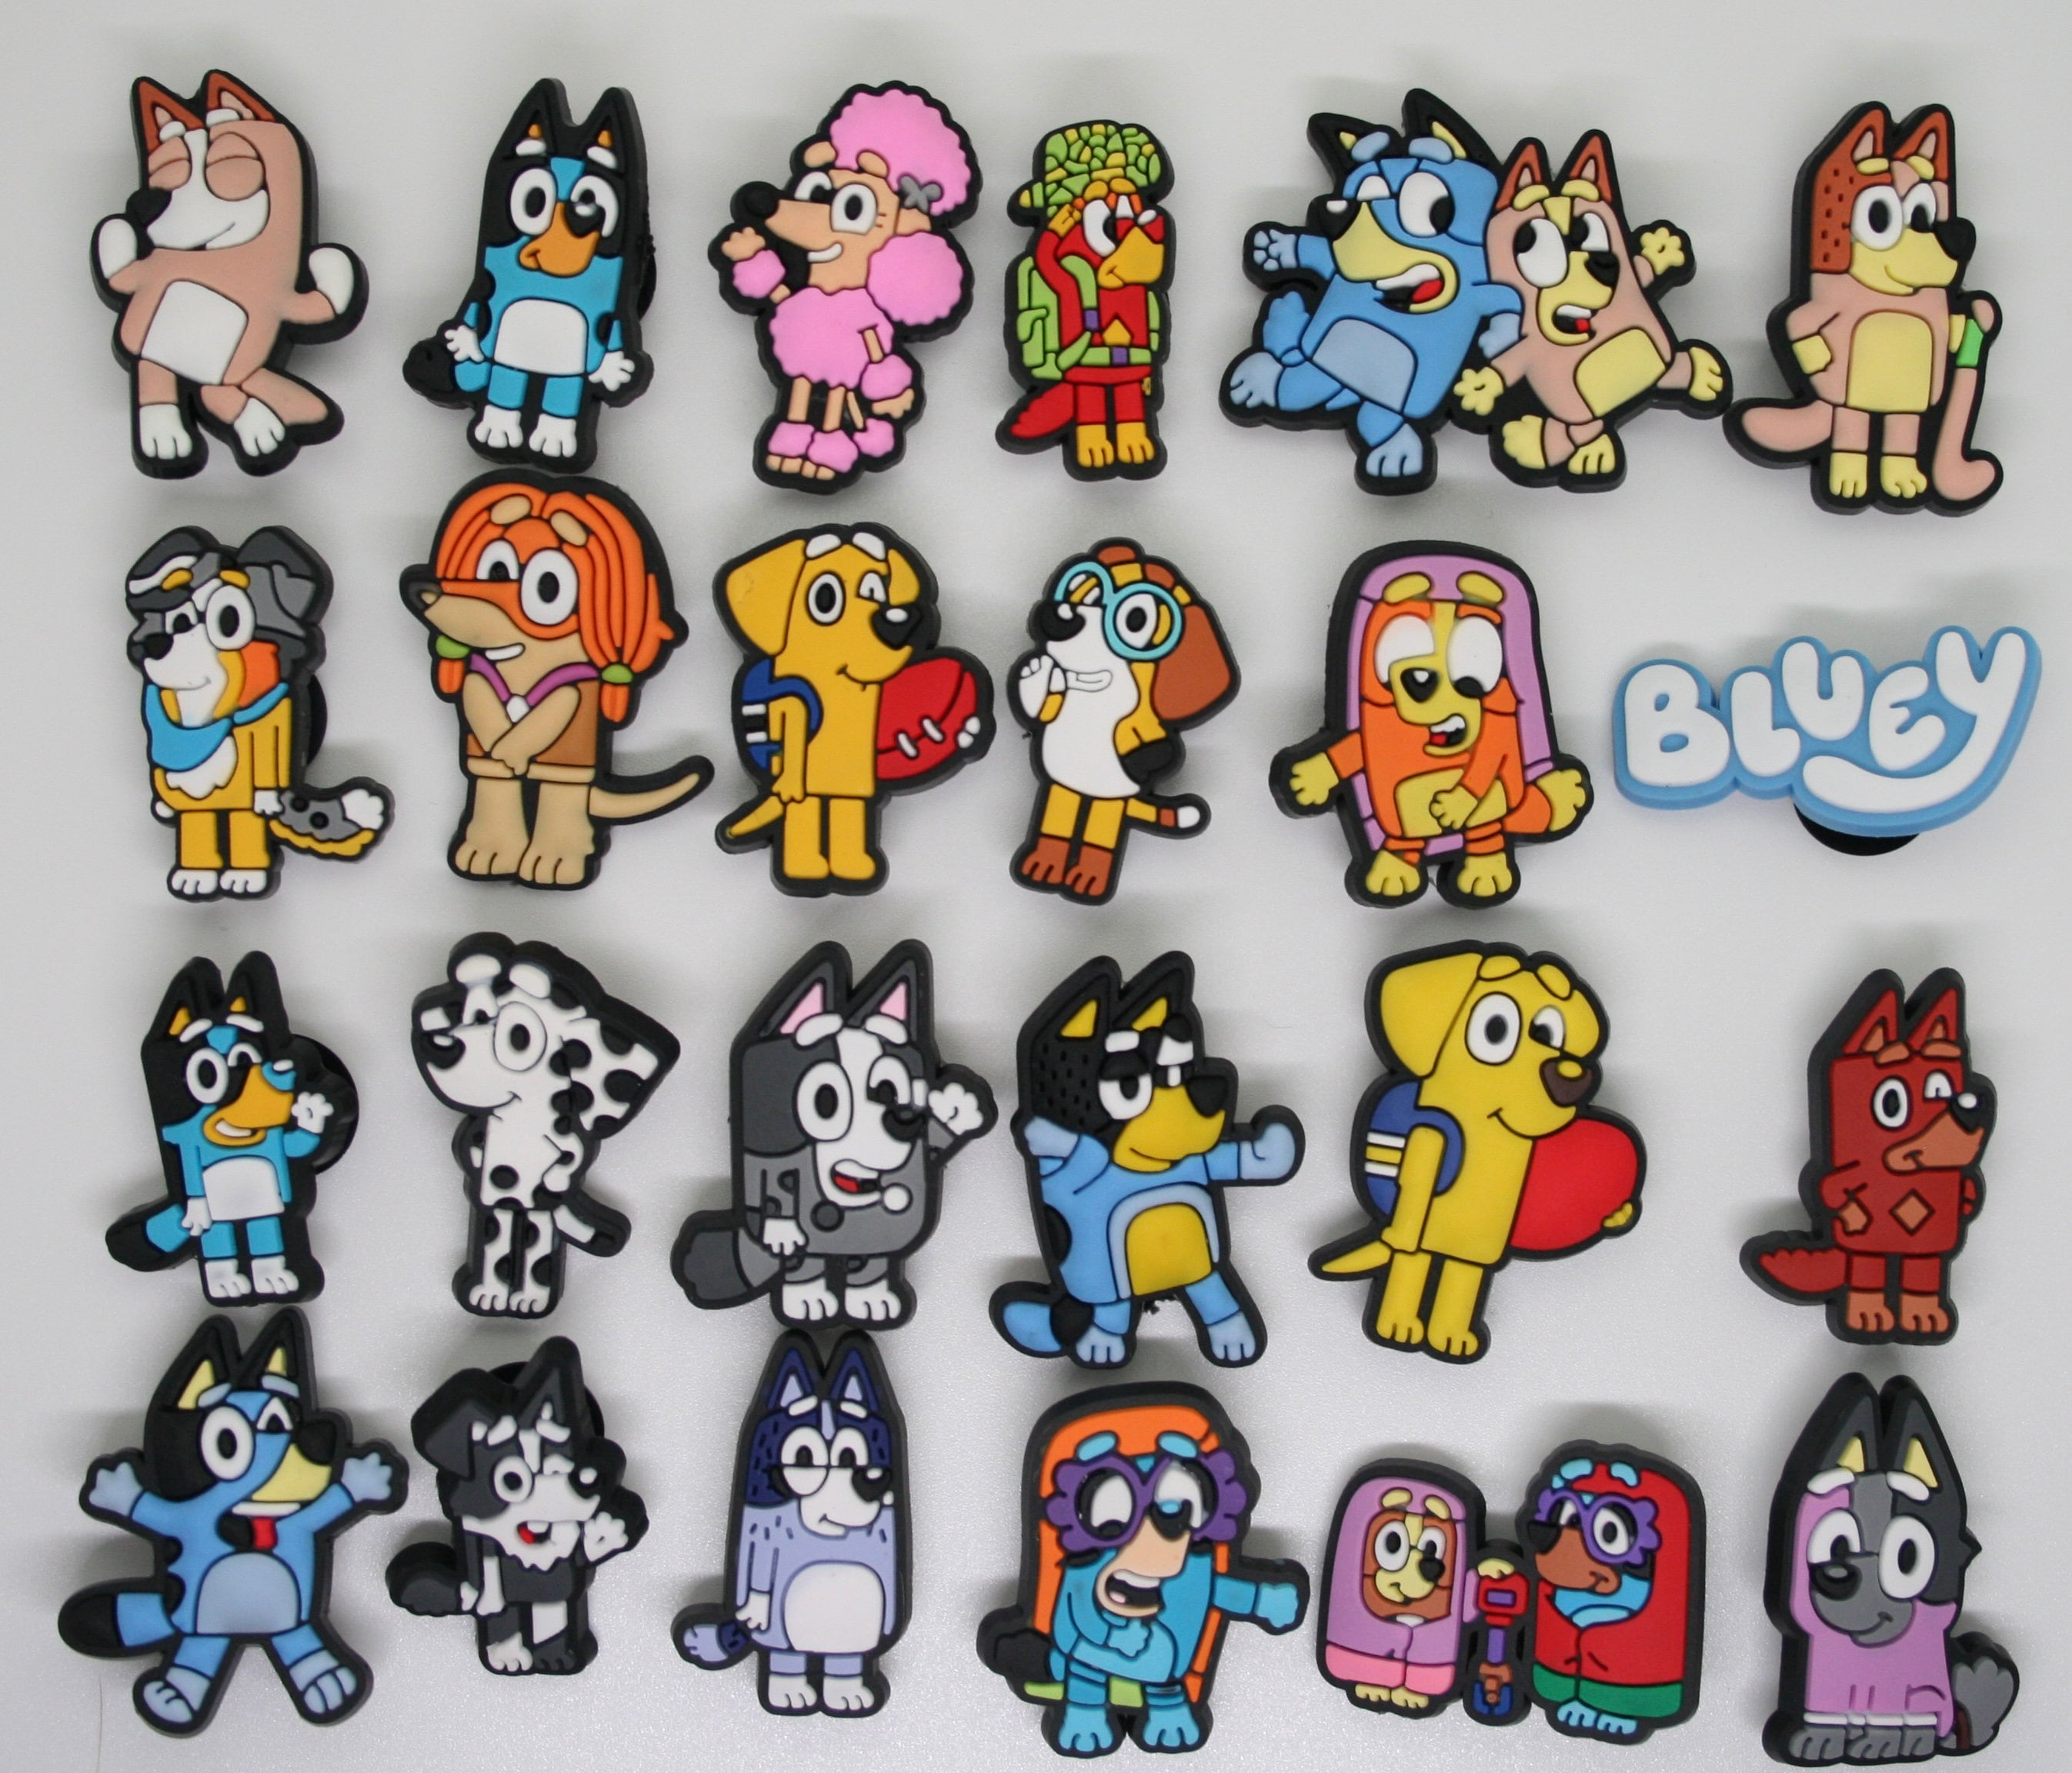 Bluey Potty Training Stickers Bundle - Over 295 Bluey Reward Stickers for Toddlers Plus Beach Kids Door Hanger | Bluey Stickers Party Favors